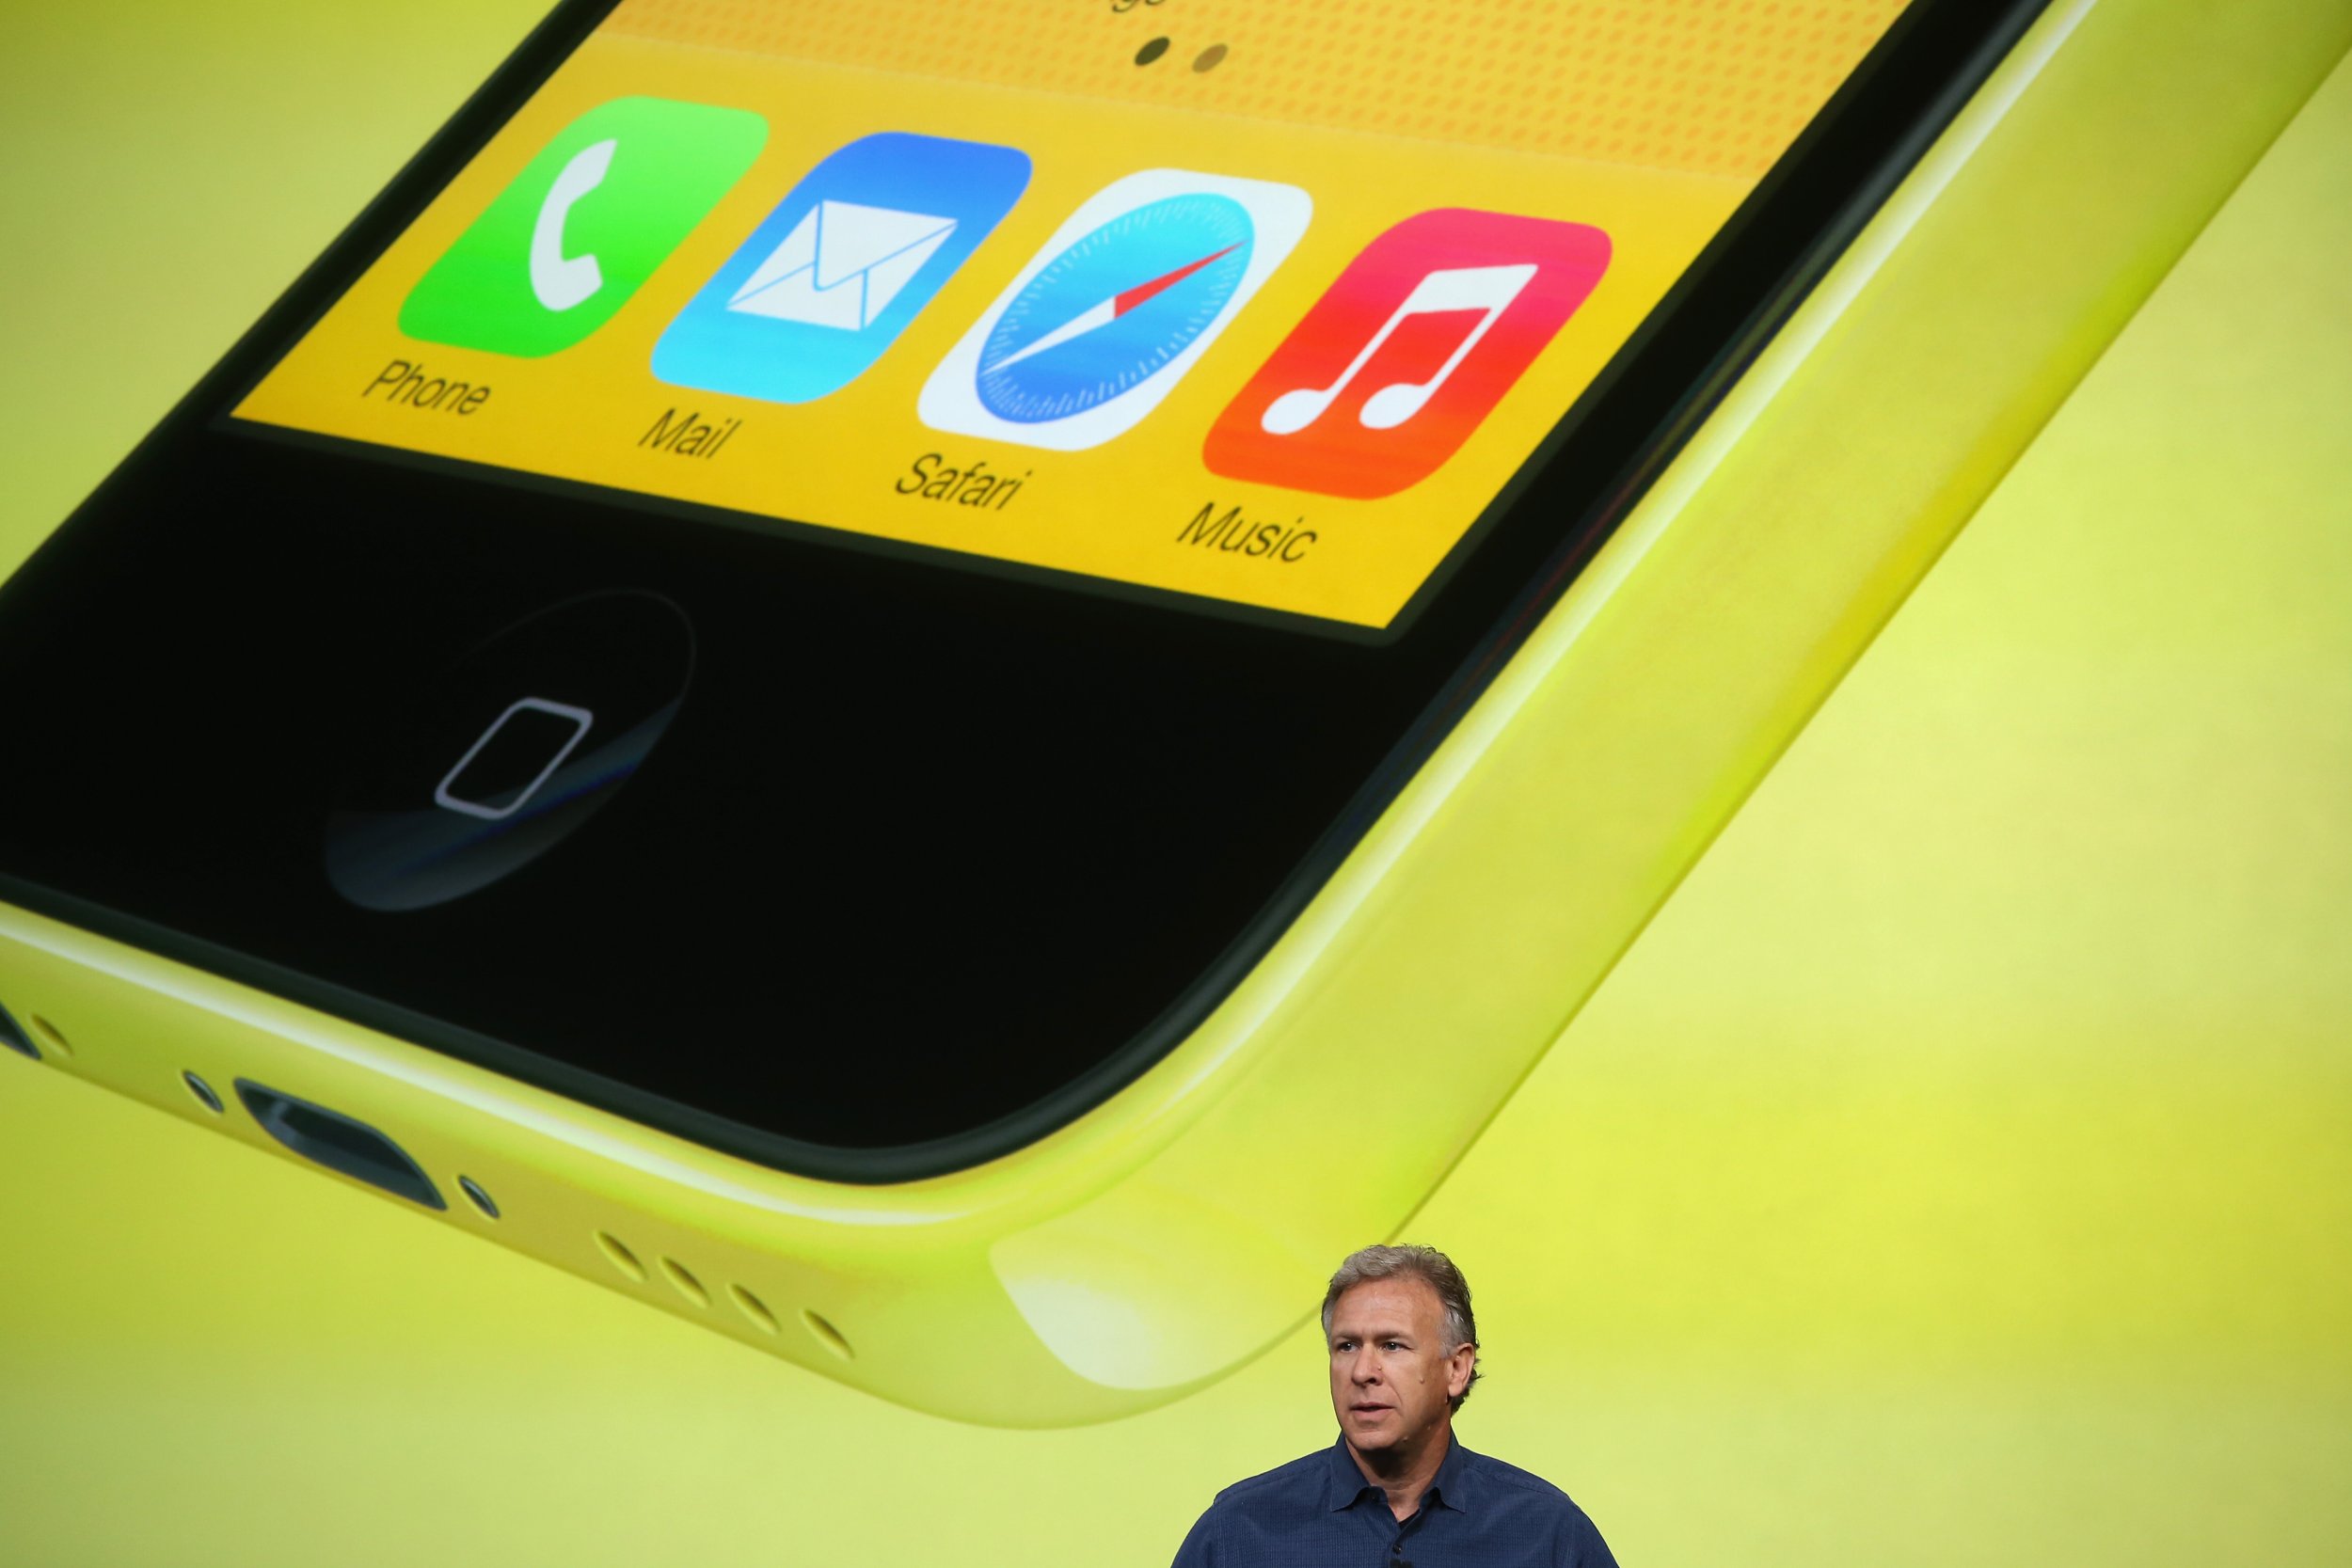 Apple S Iphone 6 On Track To Be Biggest Iphone Launch Ever Analyst Says Ibtimes